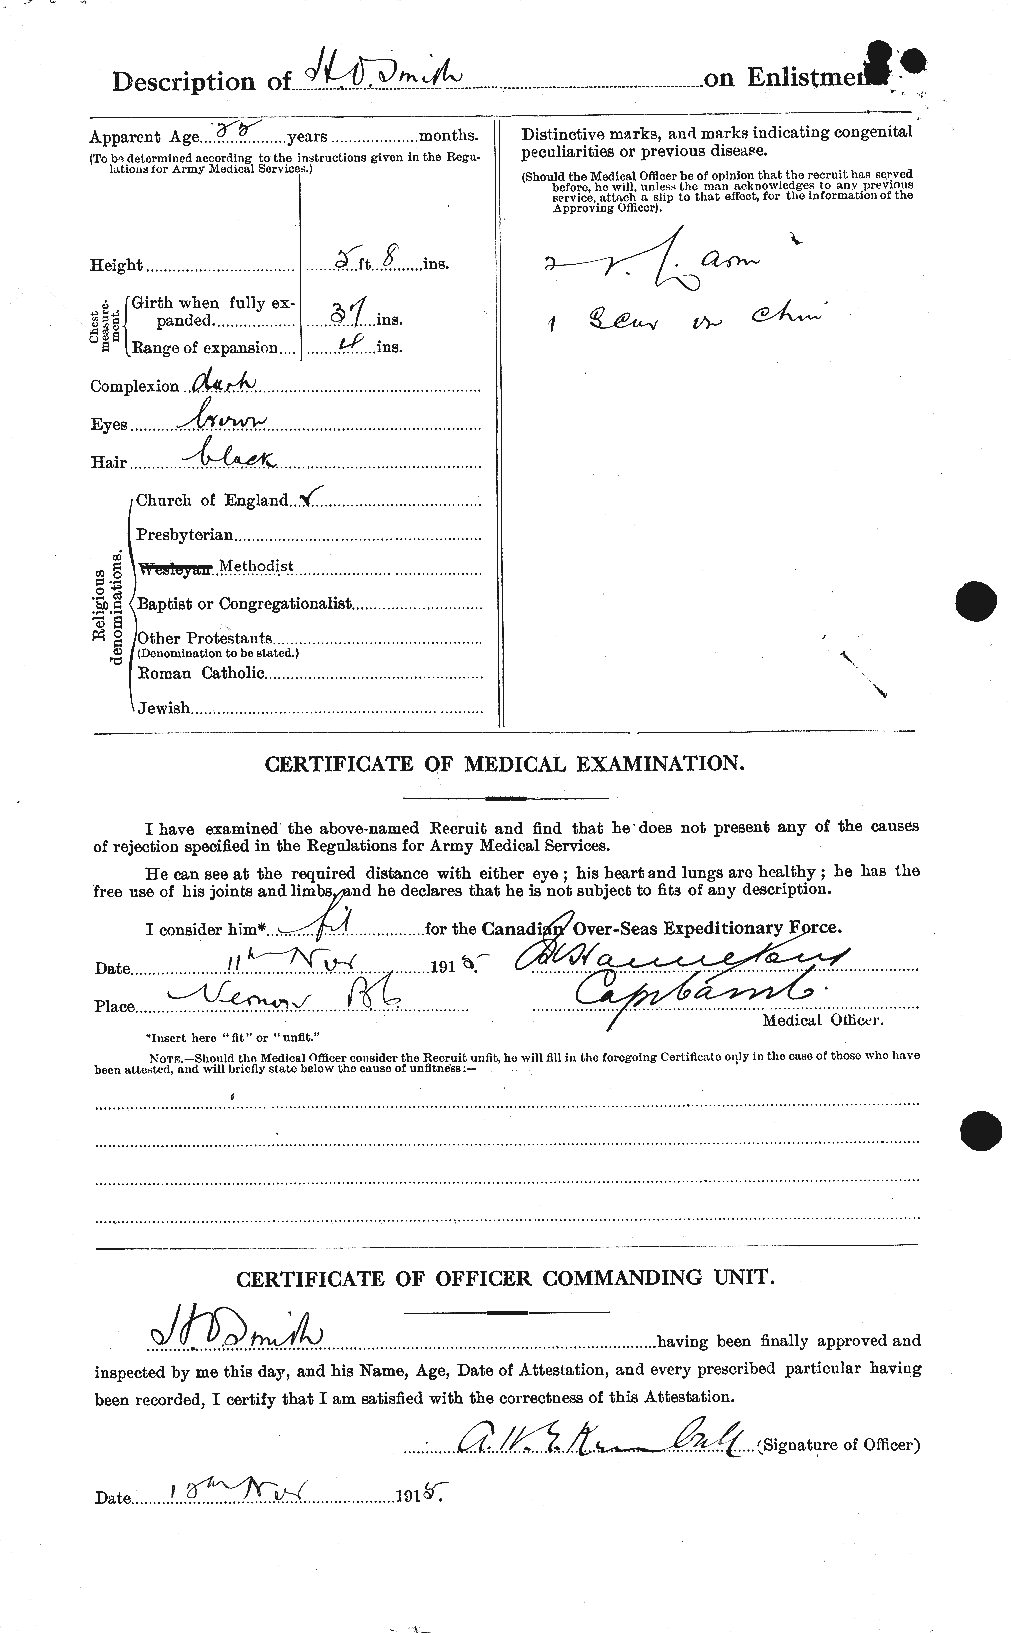 Personnel Records of the First World War - CEF 106195b